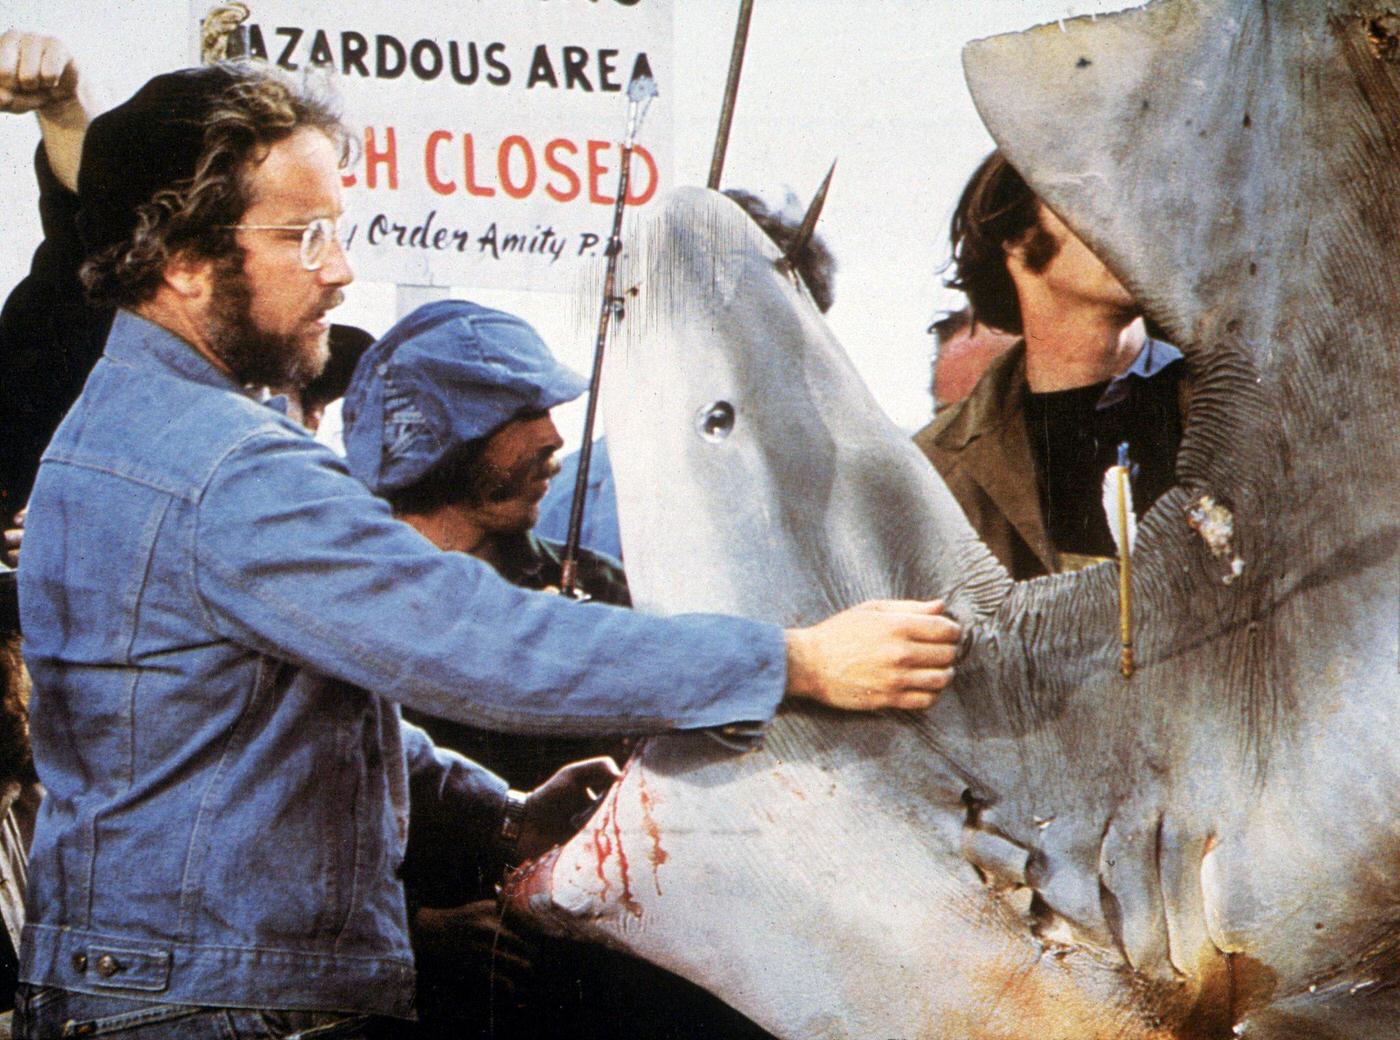 American actor Richard Dreyfuss inspects the mouth of a dead Great White shark in a still from director Steven Spielberg's film, 'Jaws,' 1975.